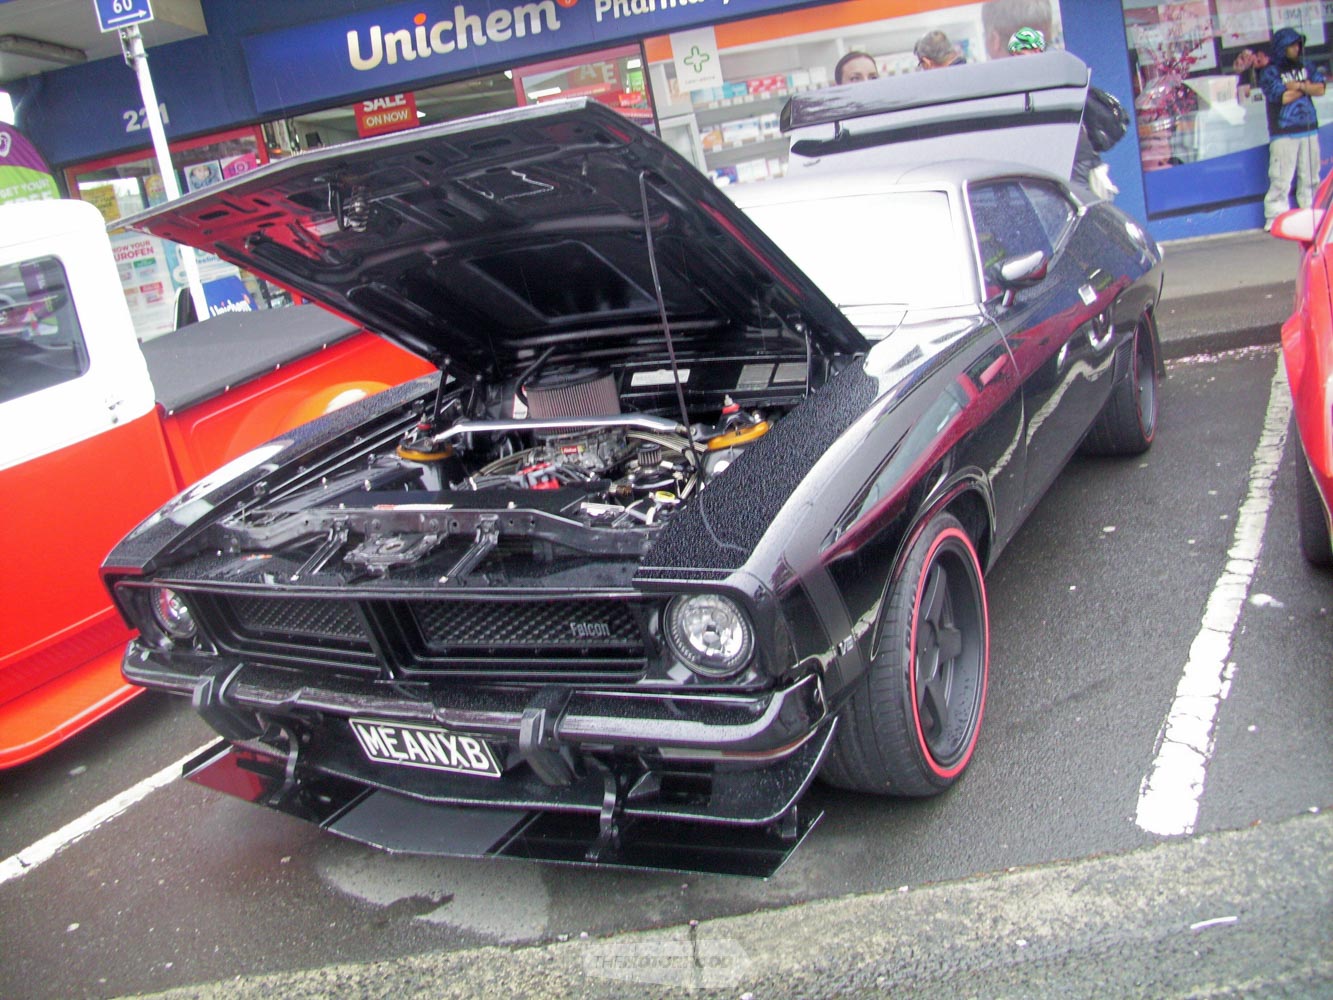 Kelvin Couchman  had the bonnet of his  Mean Xb up so the public could view all that mean Ford grunt.jpg